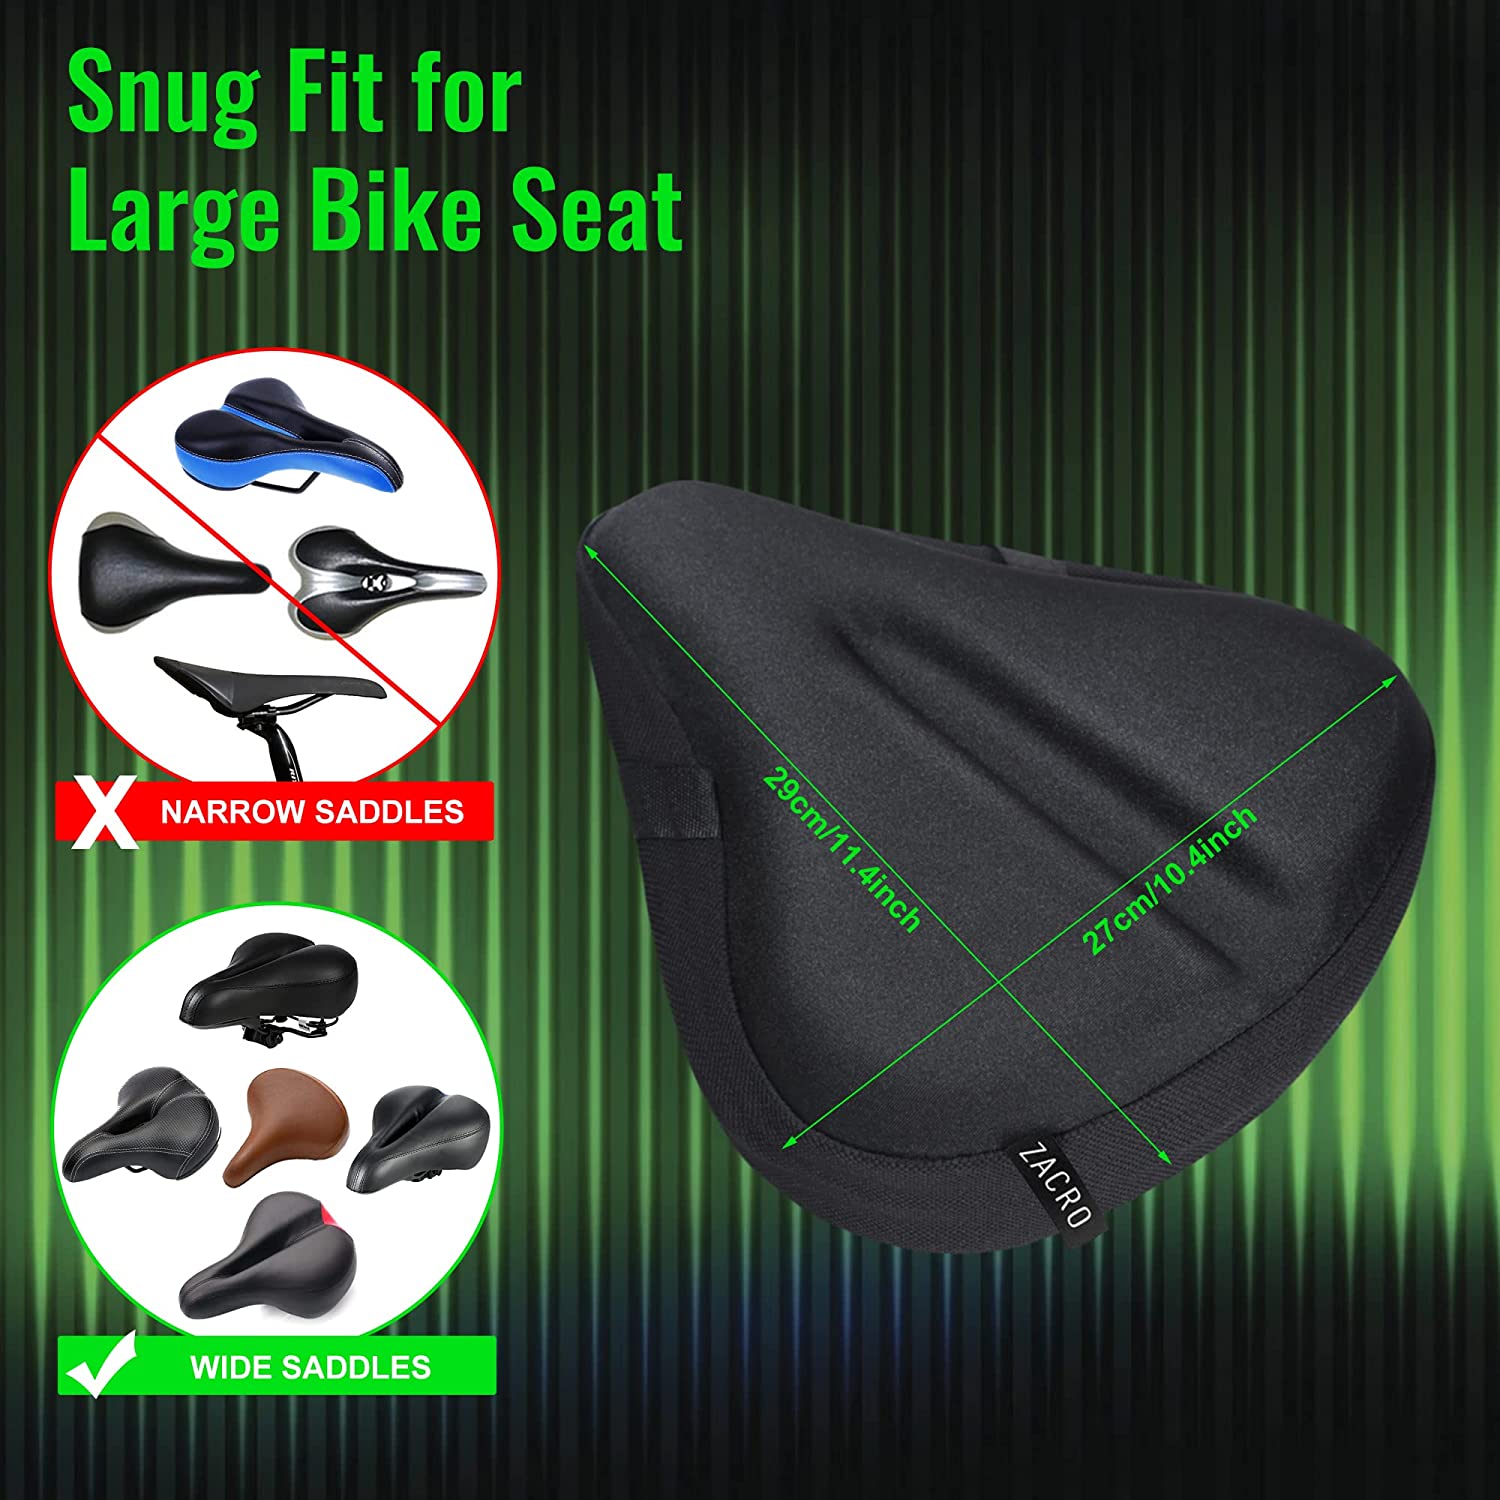 81+Lad+9j9L. AC SL1500  - Zacro Bike Seat Cushion - Gel Padded Wide Adjustable Cover for Men & Womens Comfort, Compatible with Peloton, Stationary Exercise or Cruiser Bicycle Seats, 11.4in X 10.4in, Water&Dust Resistant Cover